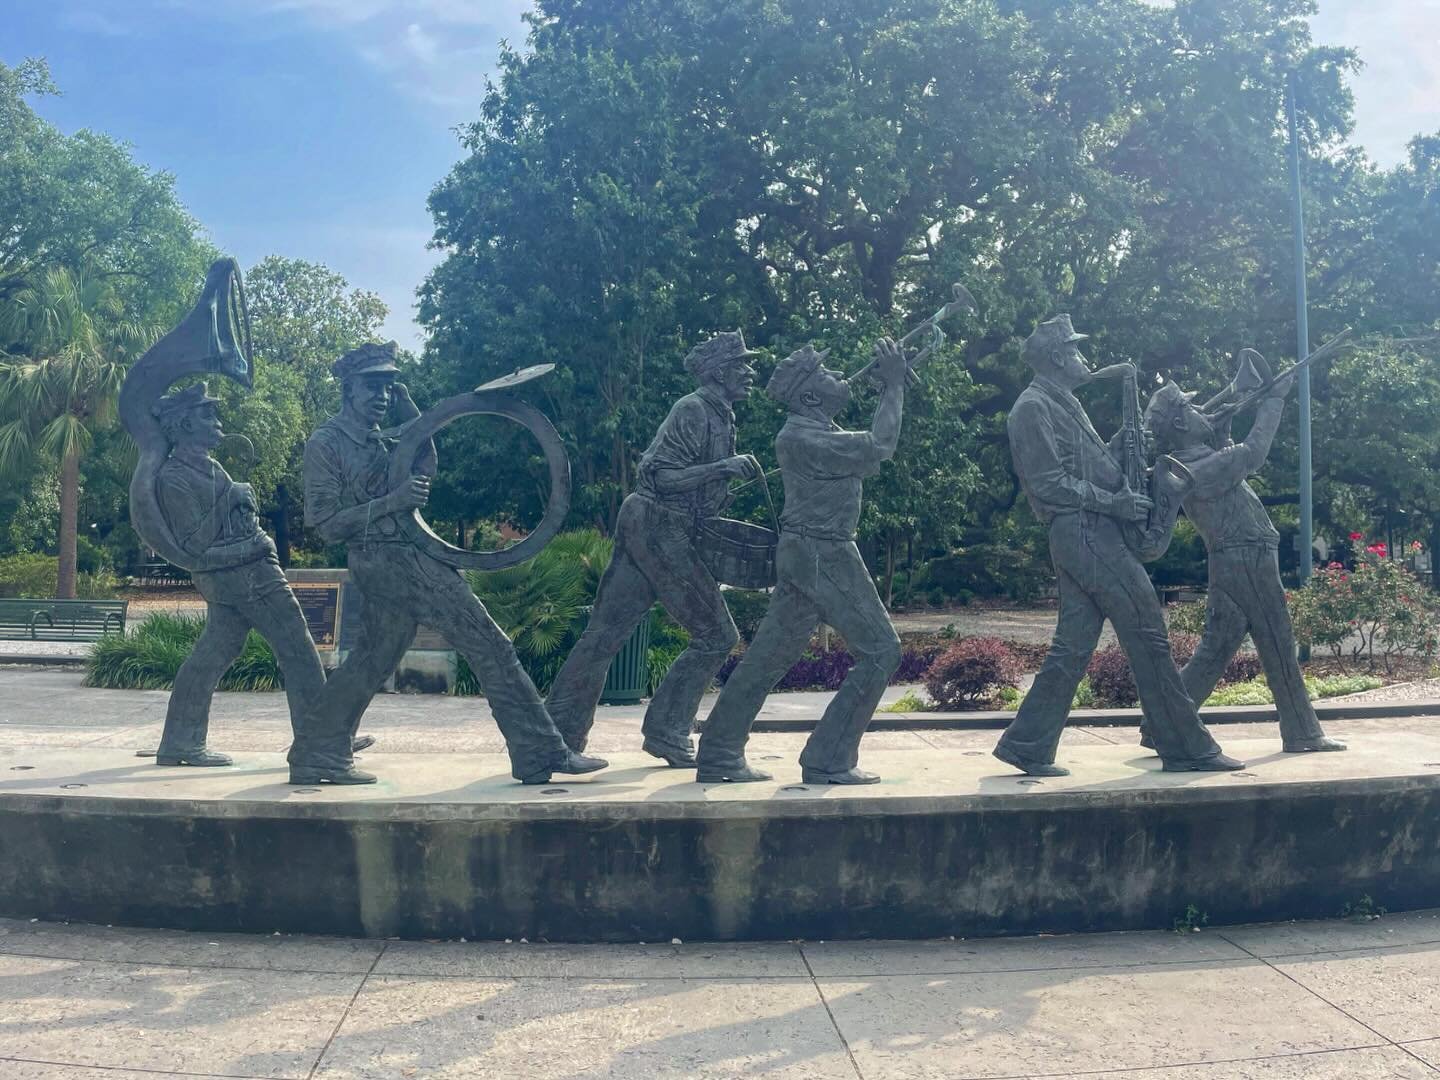 I had the pleasure of visiting NOLA this time last year, but didn&rsquo;t get a chance to visit the inside of Armstrong Park/Congo Square. It was worth the walk in the sunshine to stand in this historic place of joy for Black people.